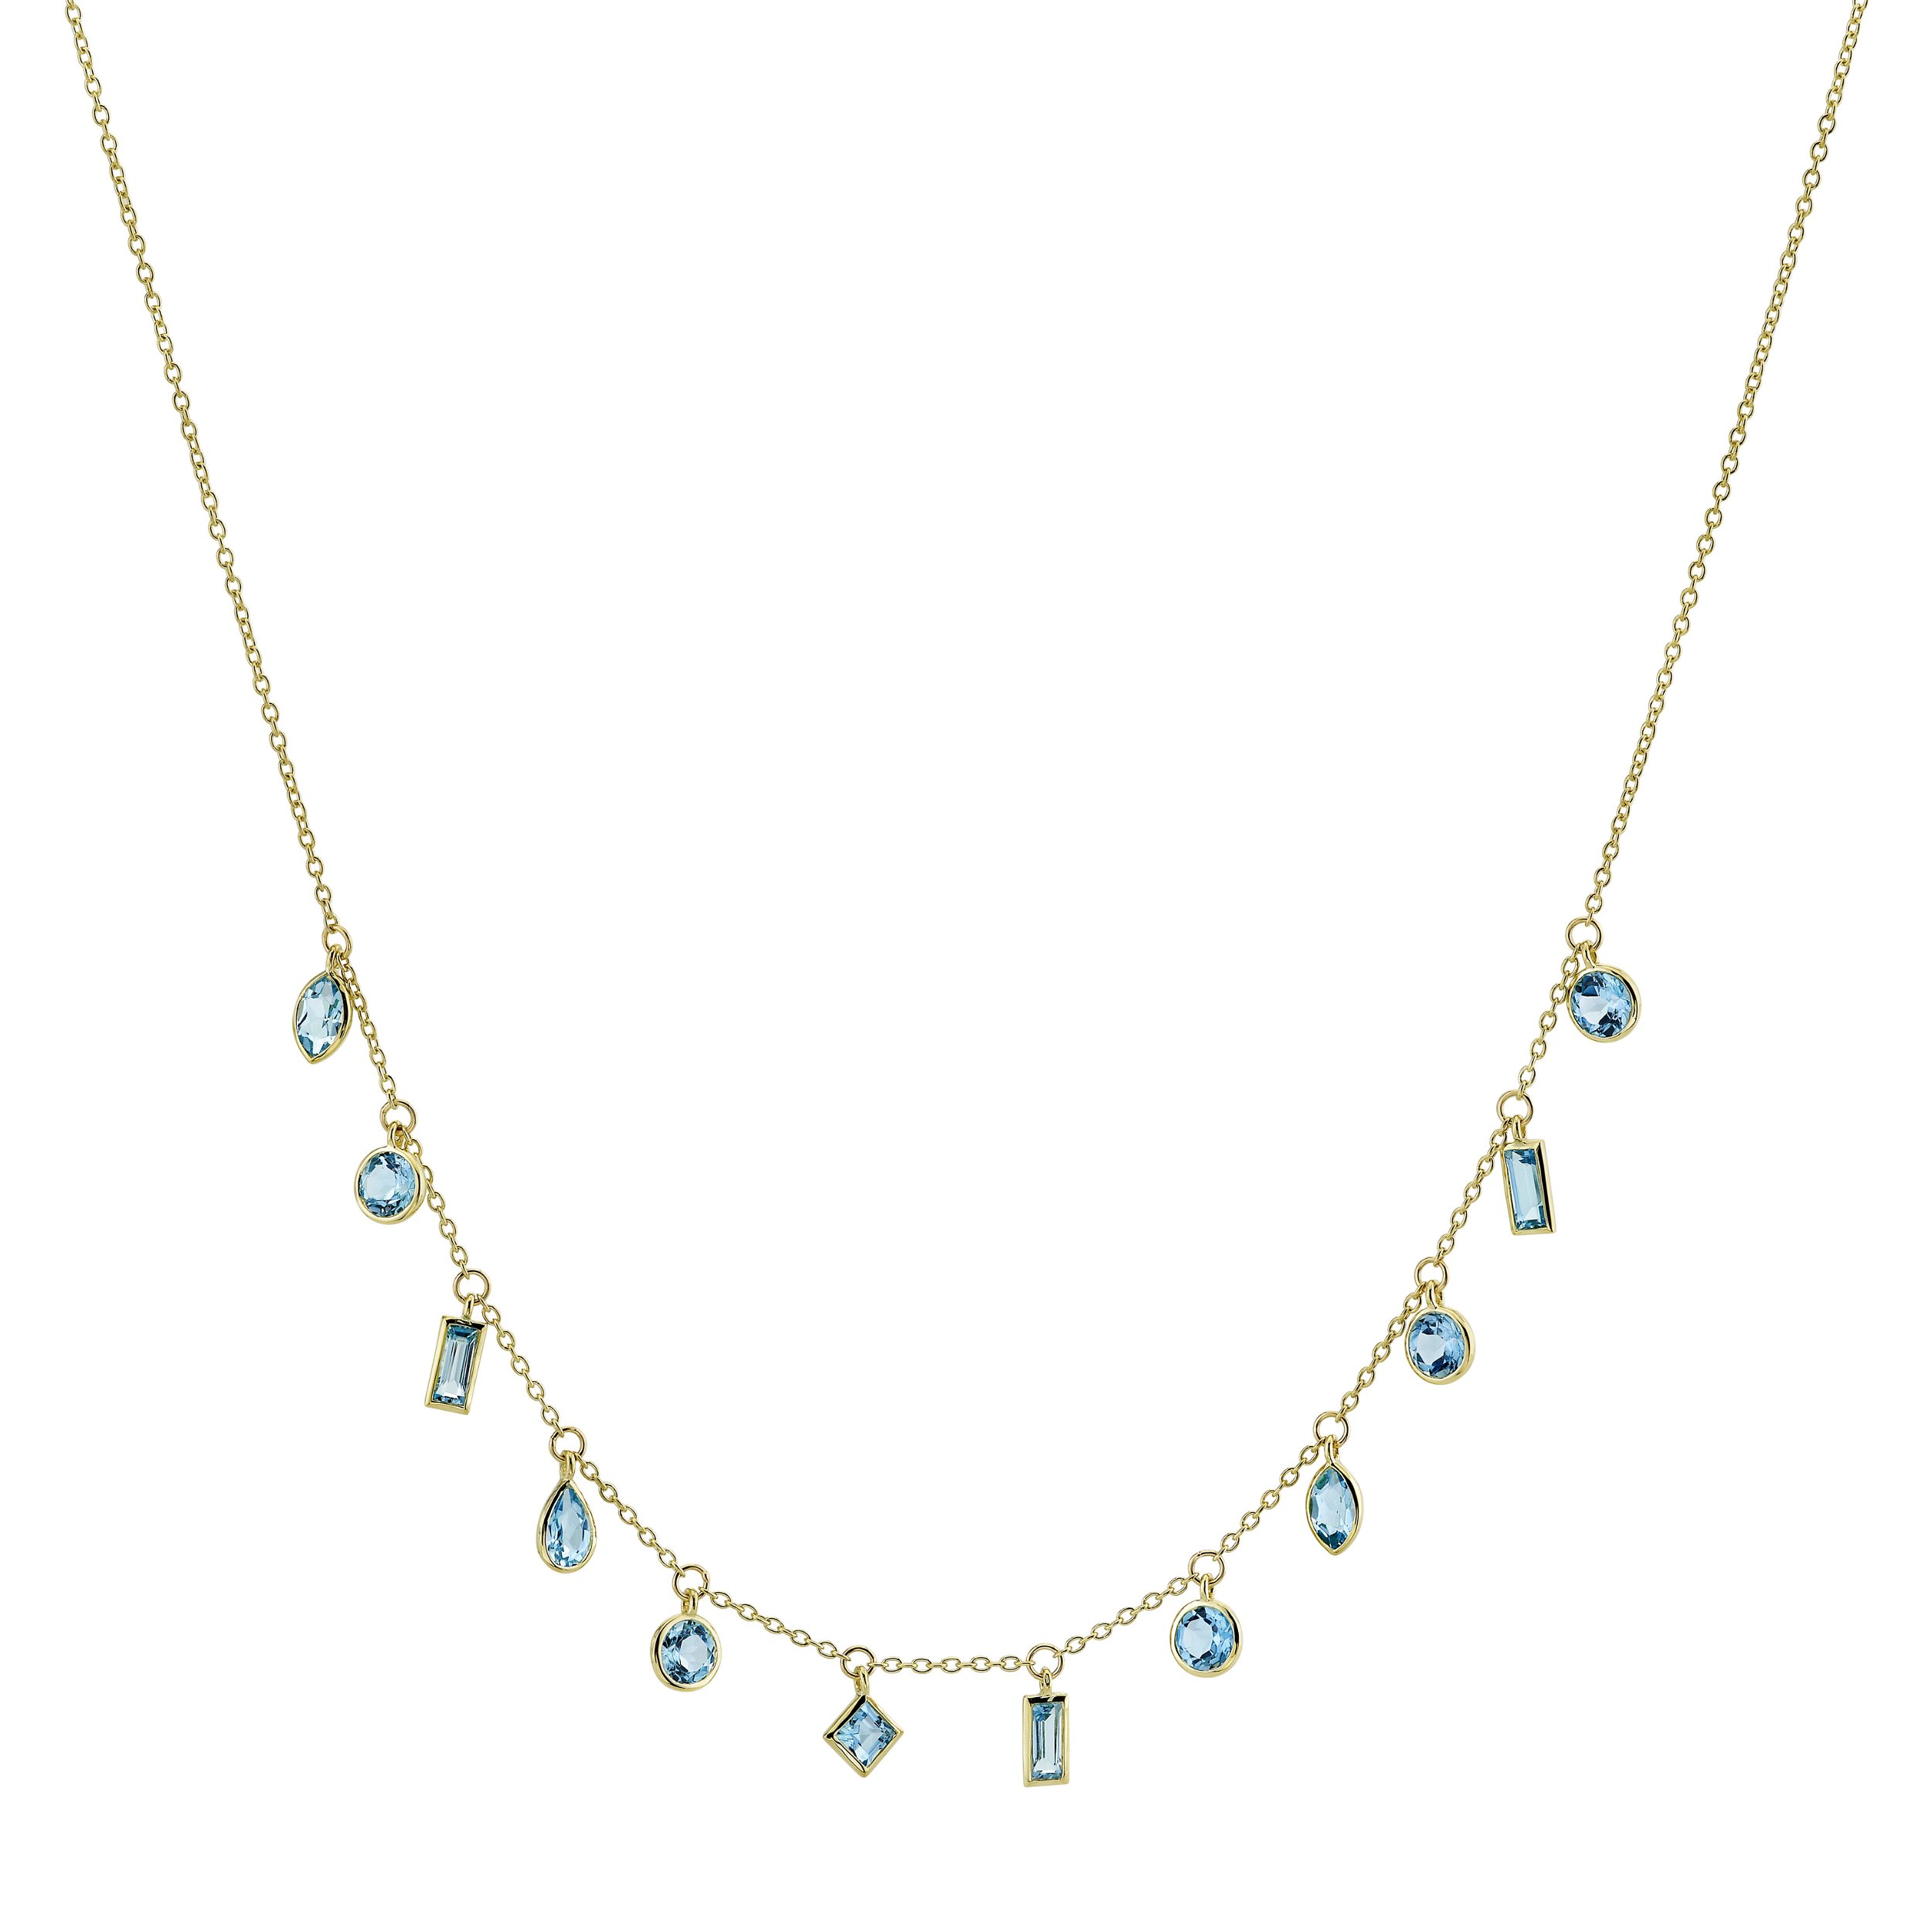 SLOANE STREET CHAIN WITH HANGING SWSS BLUE TOPAZ IN MIXED SHAPES & SIZES, 18K-YG